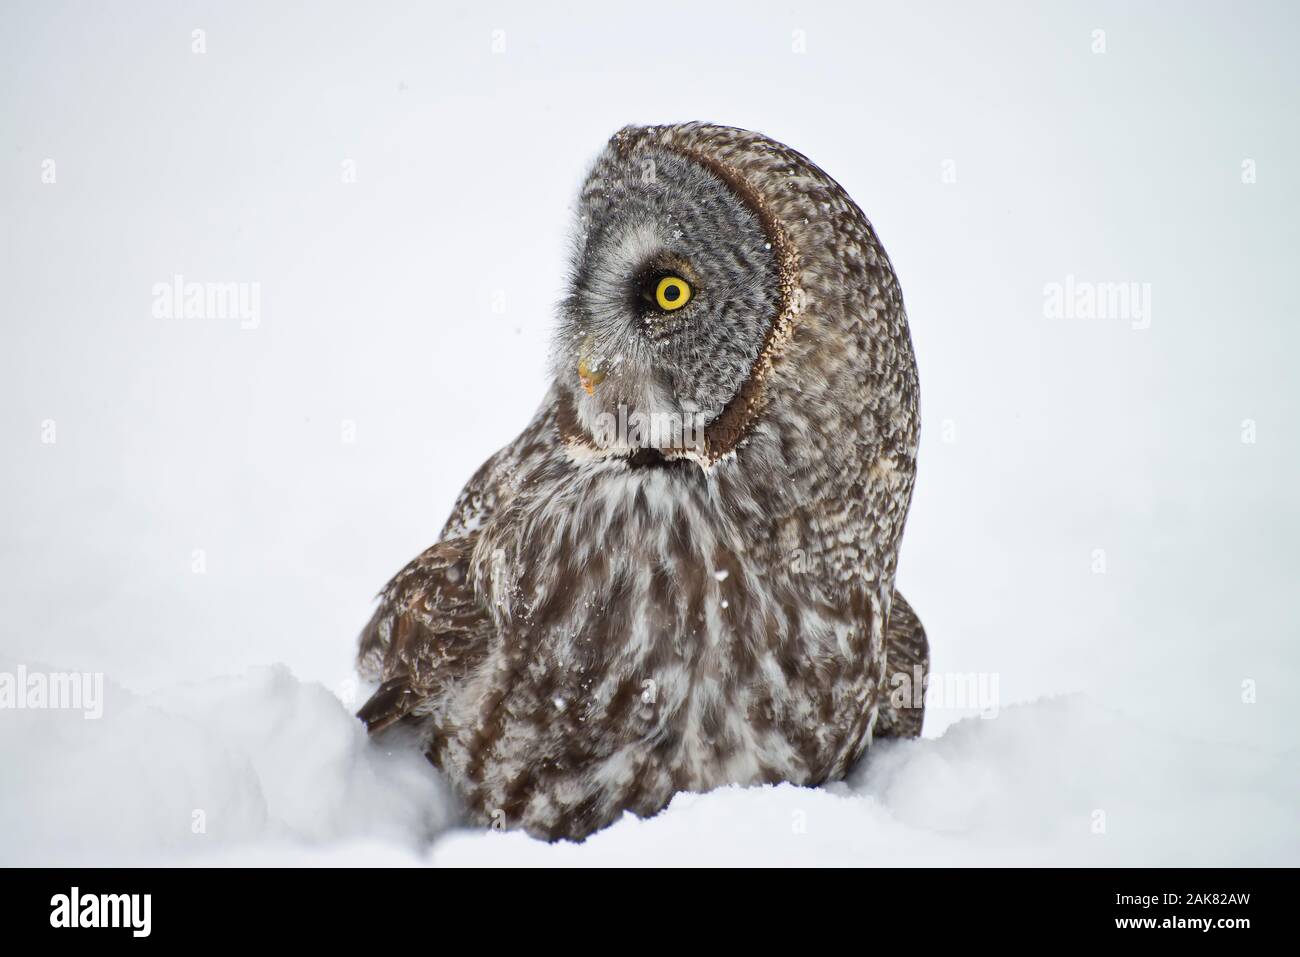 Great Gray Owl standing on snow. Stock Photo